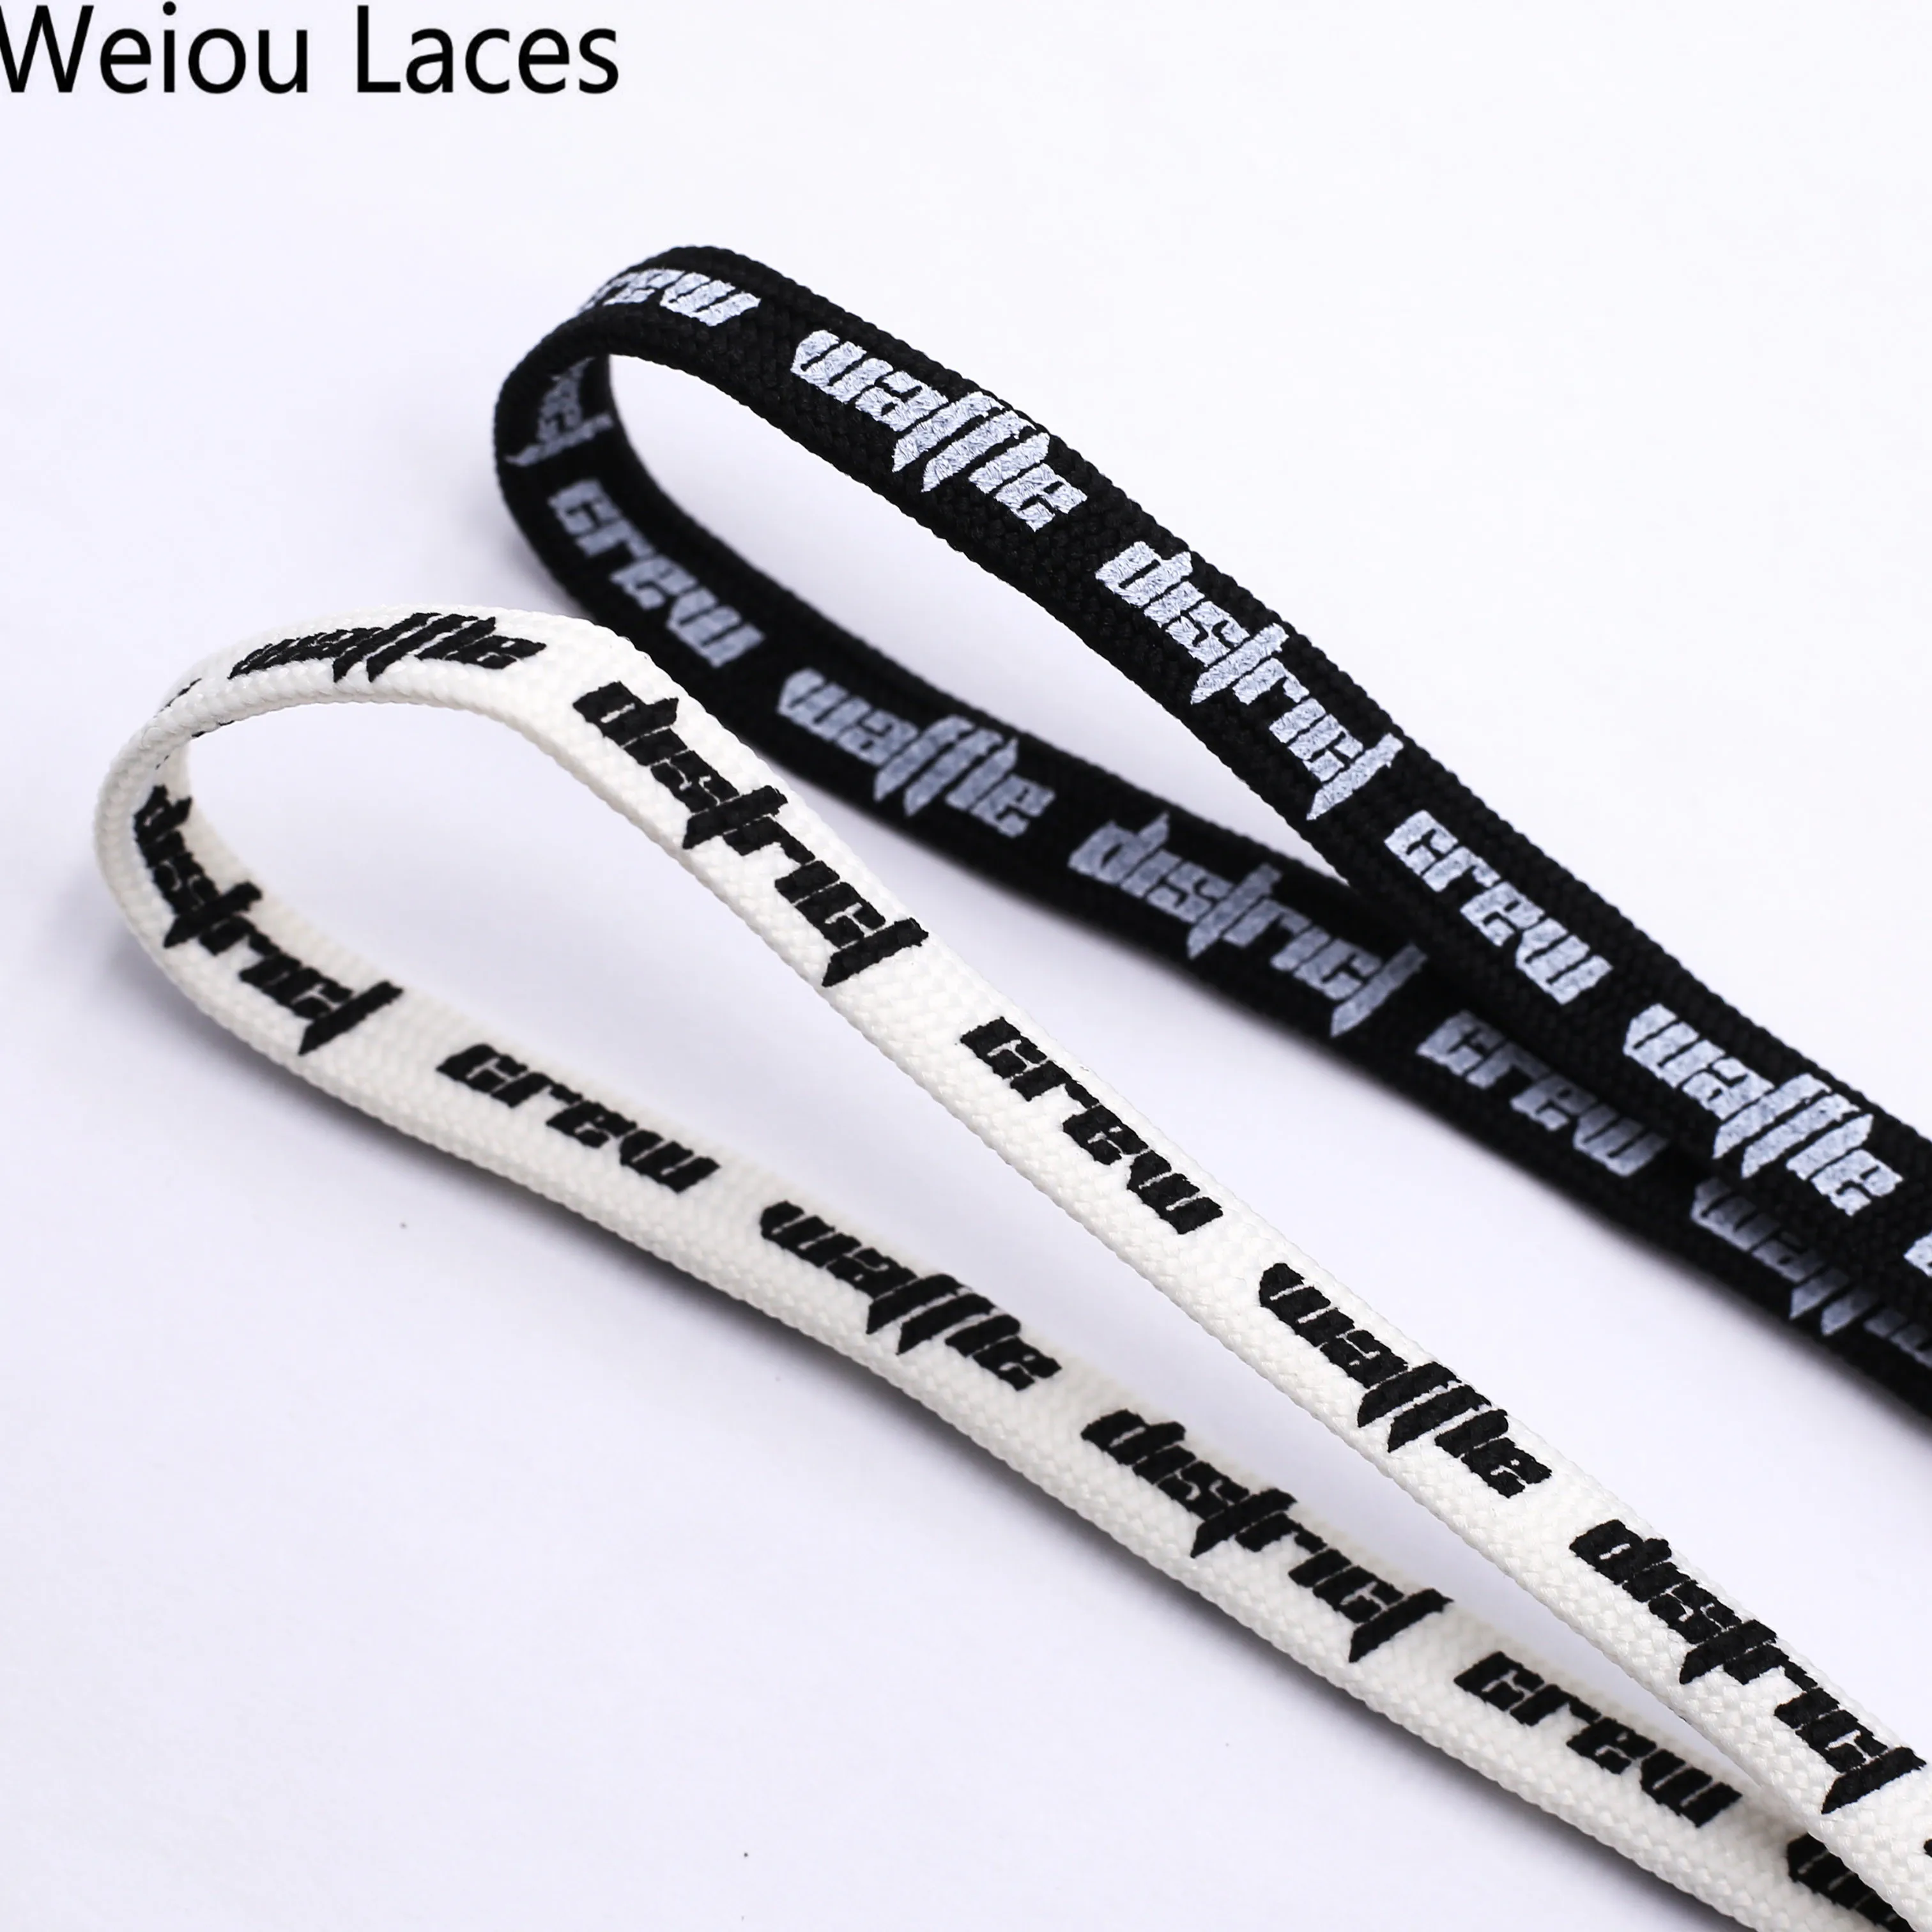 

Weiou company Flat Double-sided printed shoelaces Black and white shoestrings with a cool pattern for kids adults sport shoes, Black,white